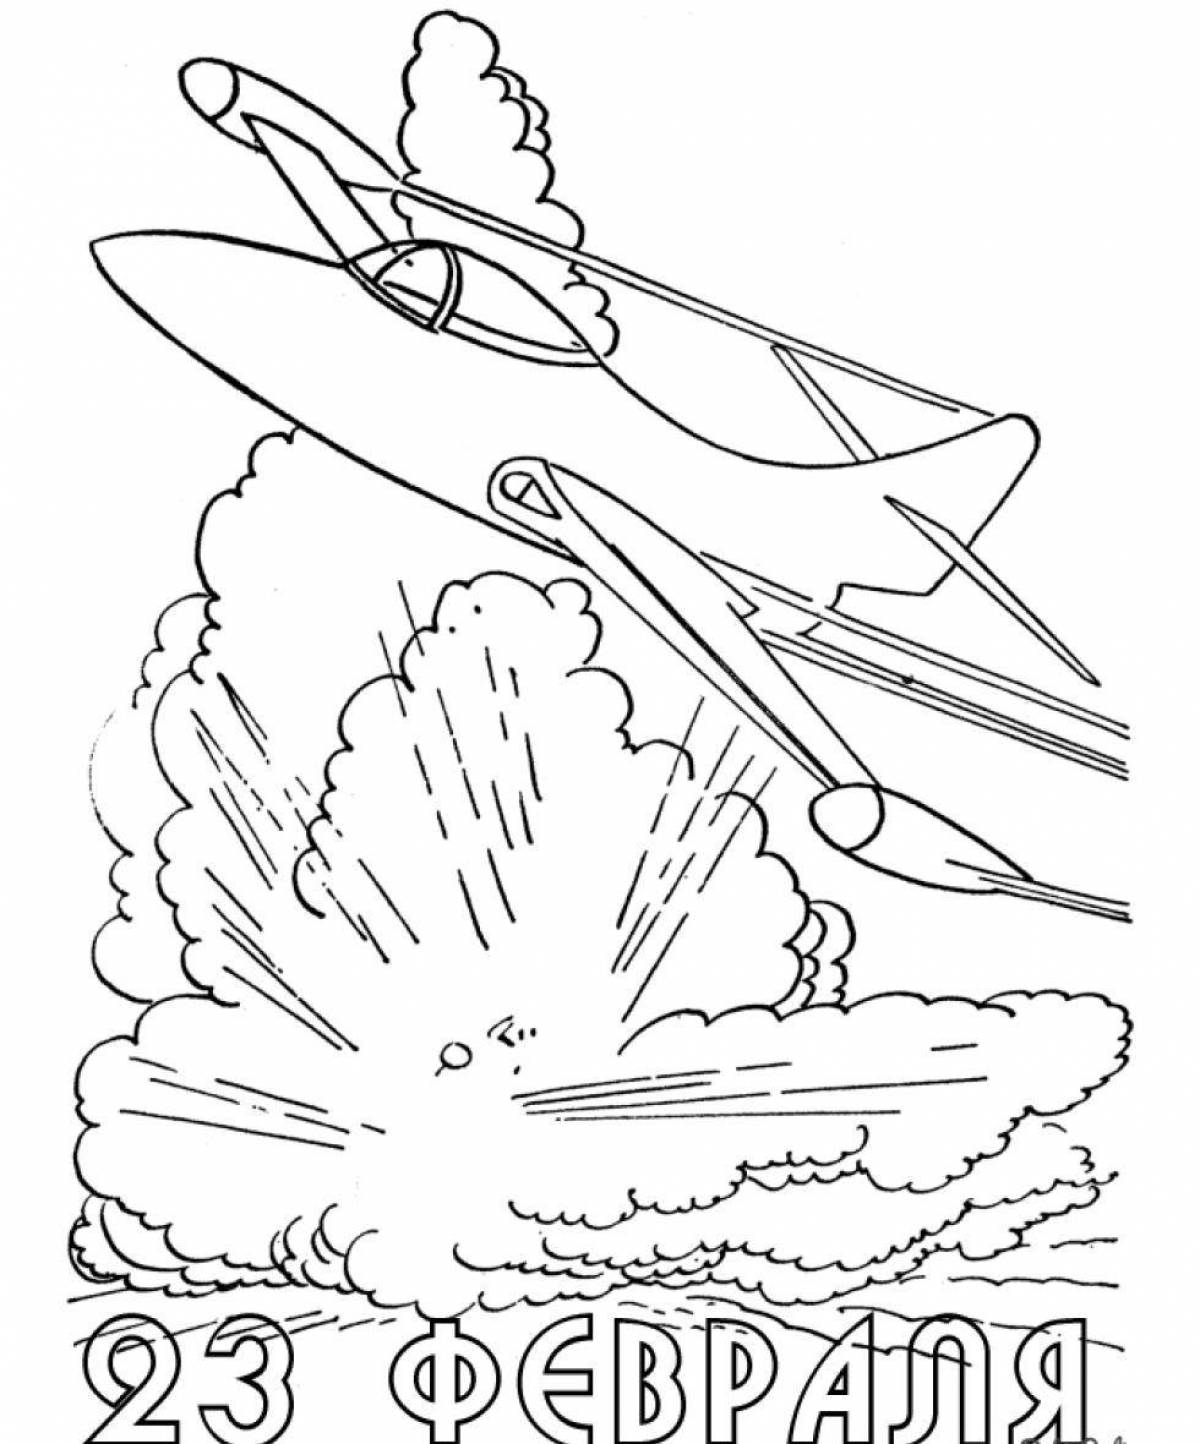 Bright military coloring for preschoolers